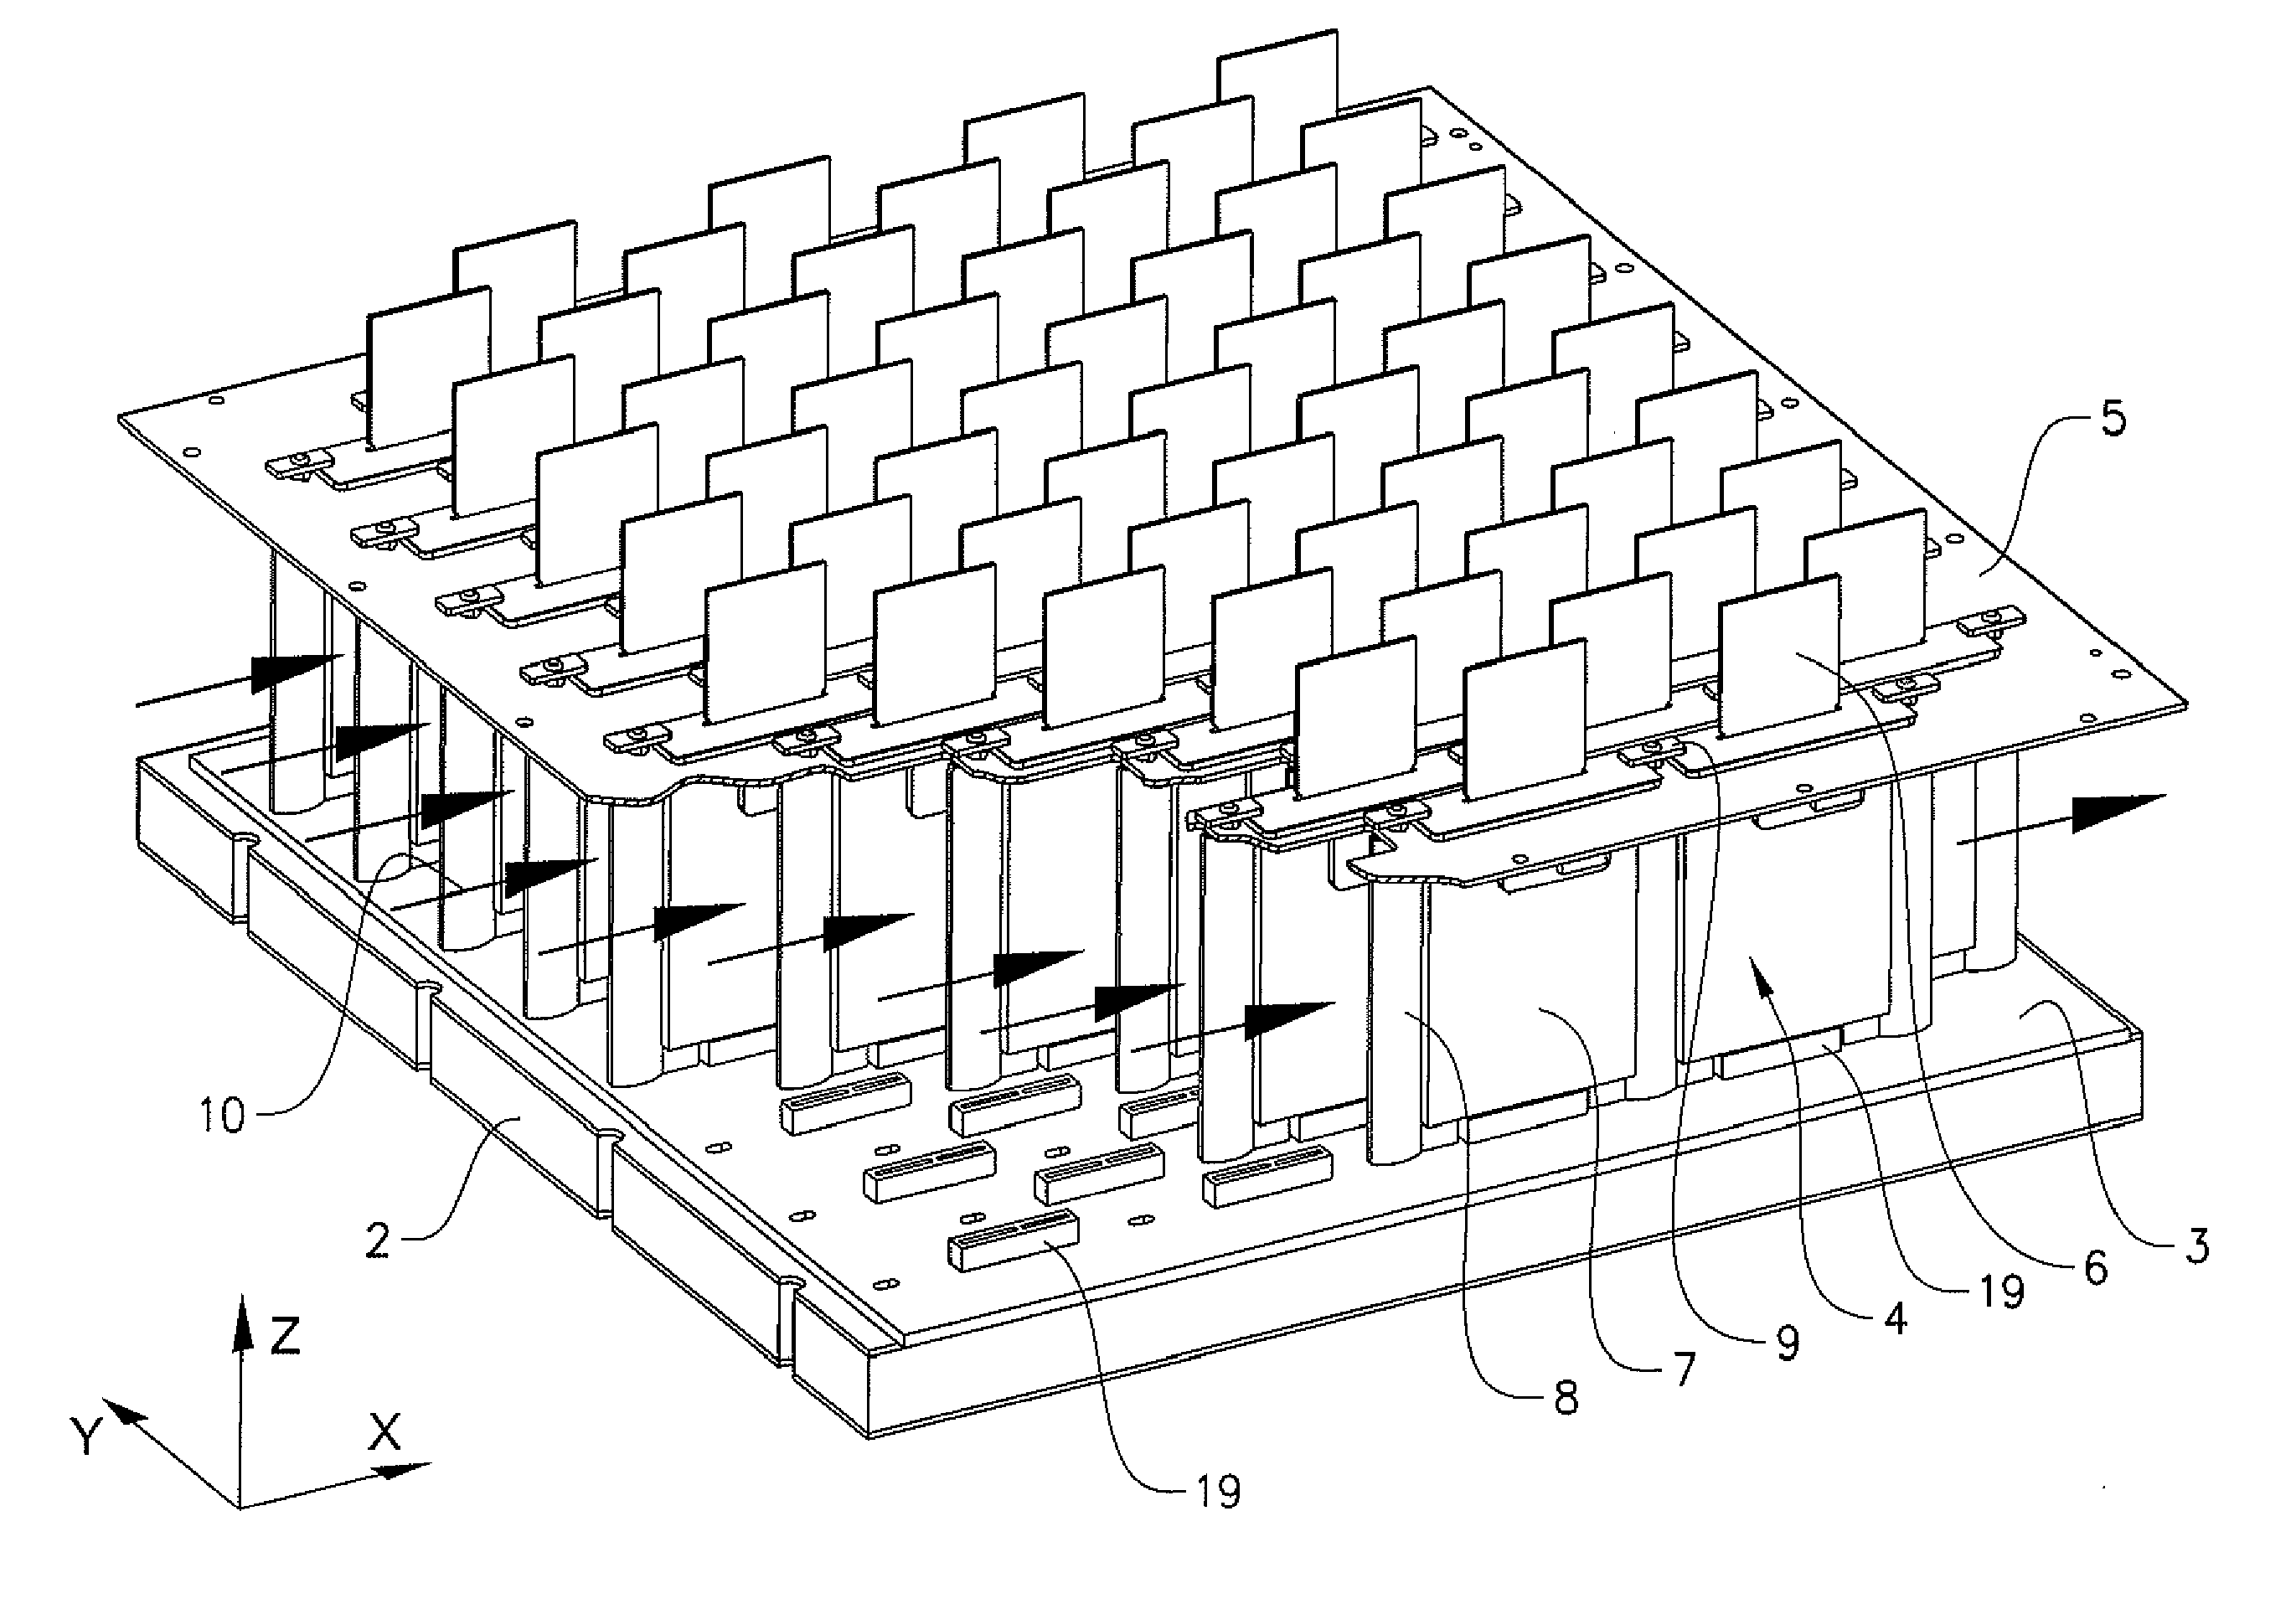 Mounting system for transmitter receiver modules